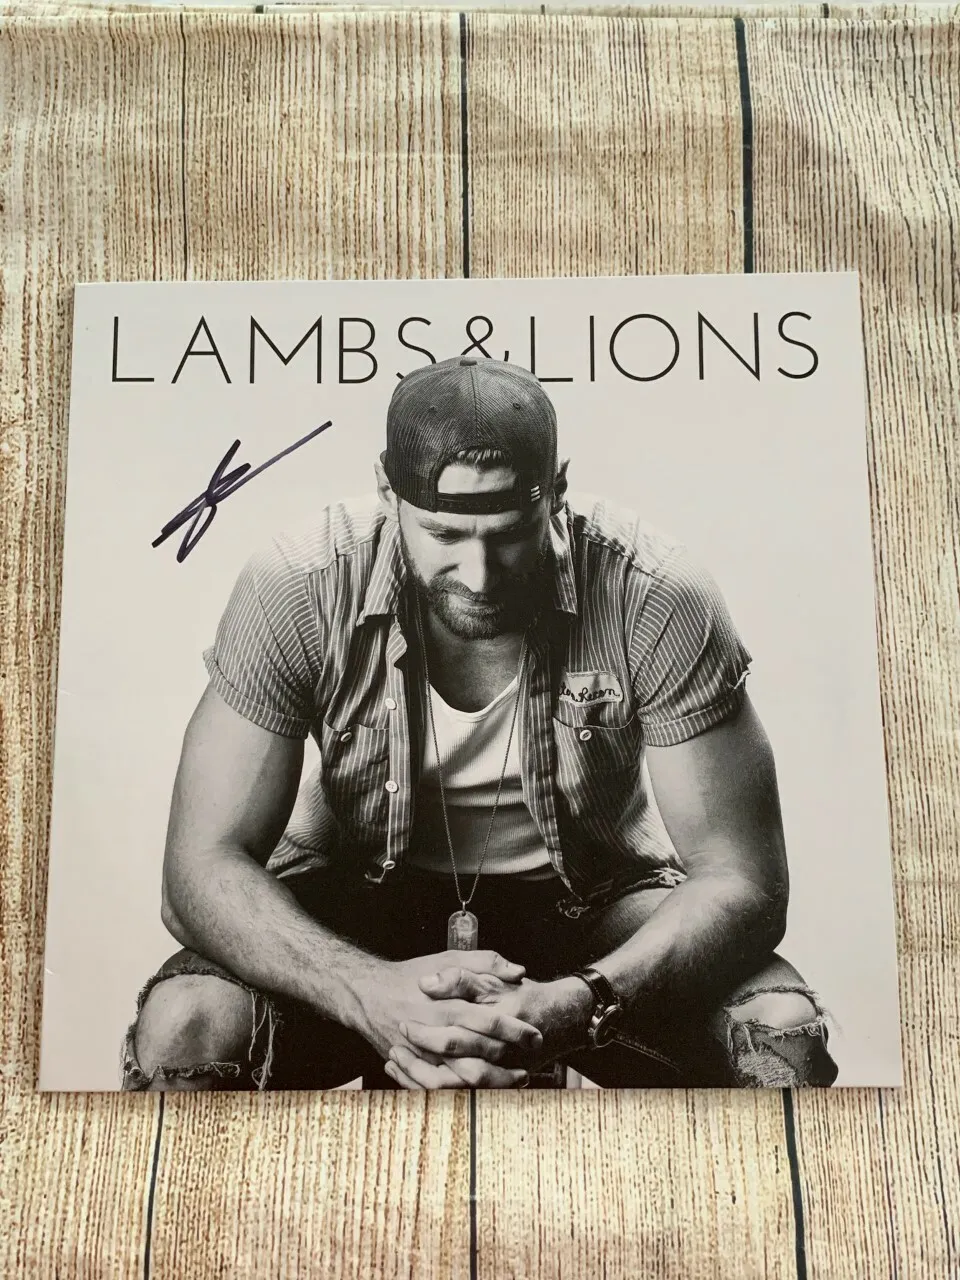 CHASE RICE Signed Autograph Lambs & Lions LP Vinyl Record Country Music